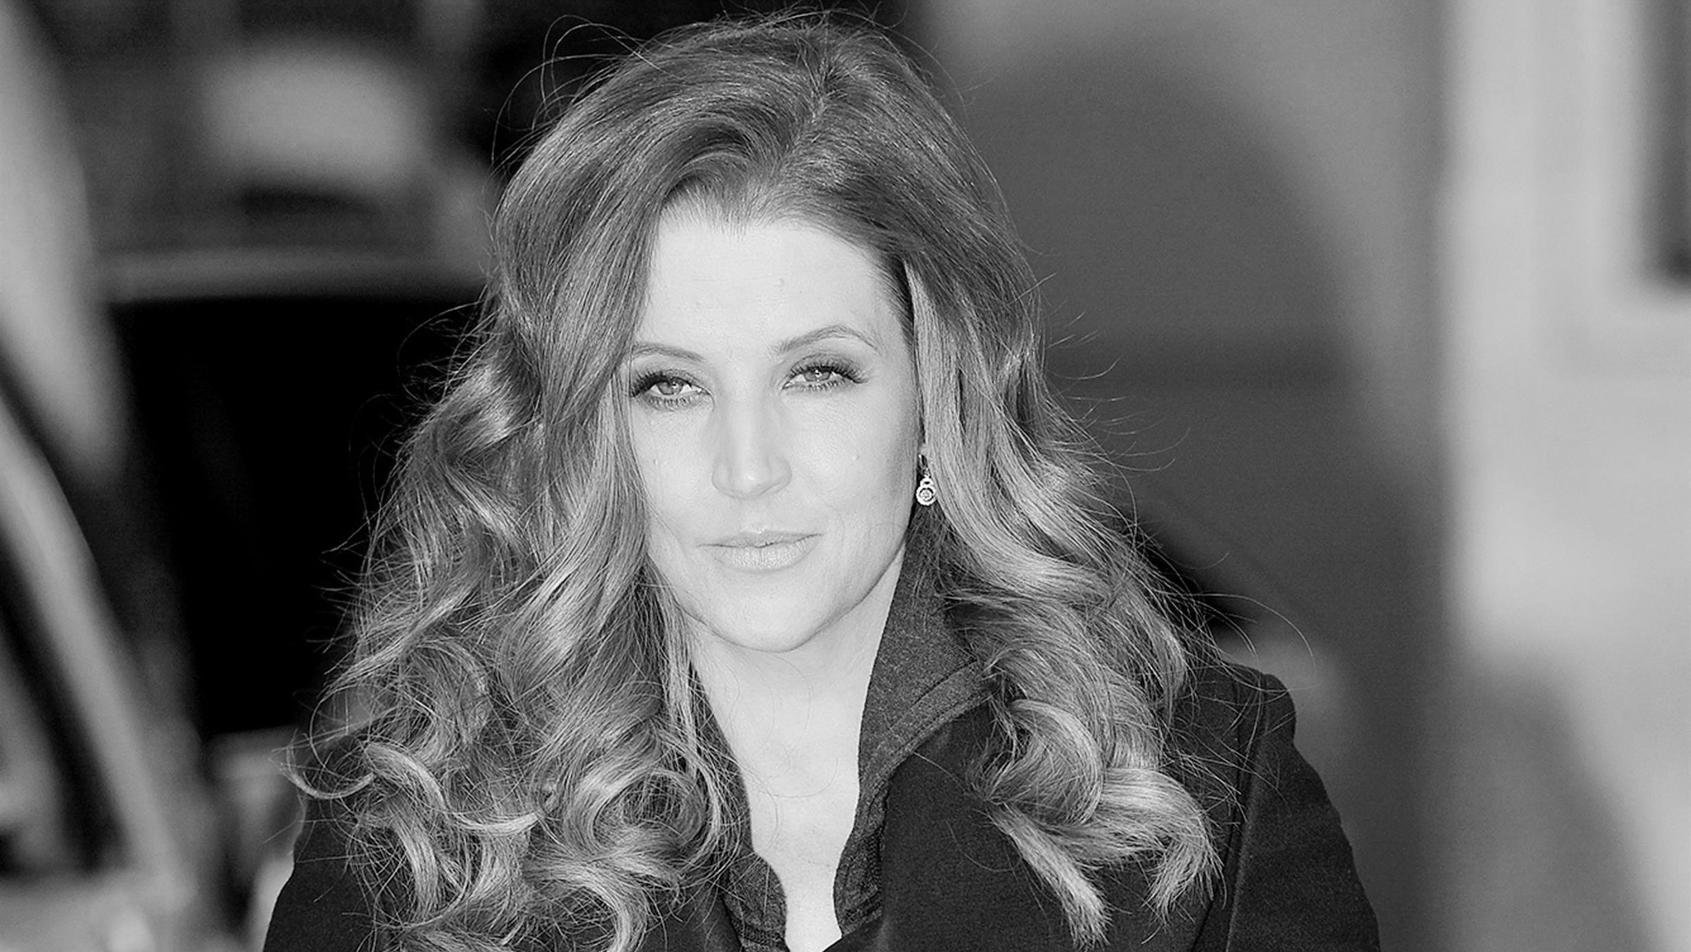 BGUK_2546733 - LONDON, UNITED KINGDOM - *STOCK IMAGES* Lisa Marie Presley, singer and daughter of Elvis, dies aged 54.*PICTURES TAKEN ON THE 13/09/12* - LONDONSINGER LISA MARIE PRESLEY SEEN AFTER HAVING PRE-RECORDED FOR THE ITV THIS MORNING SHOW.Pict